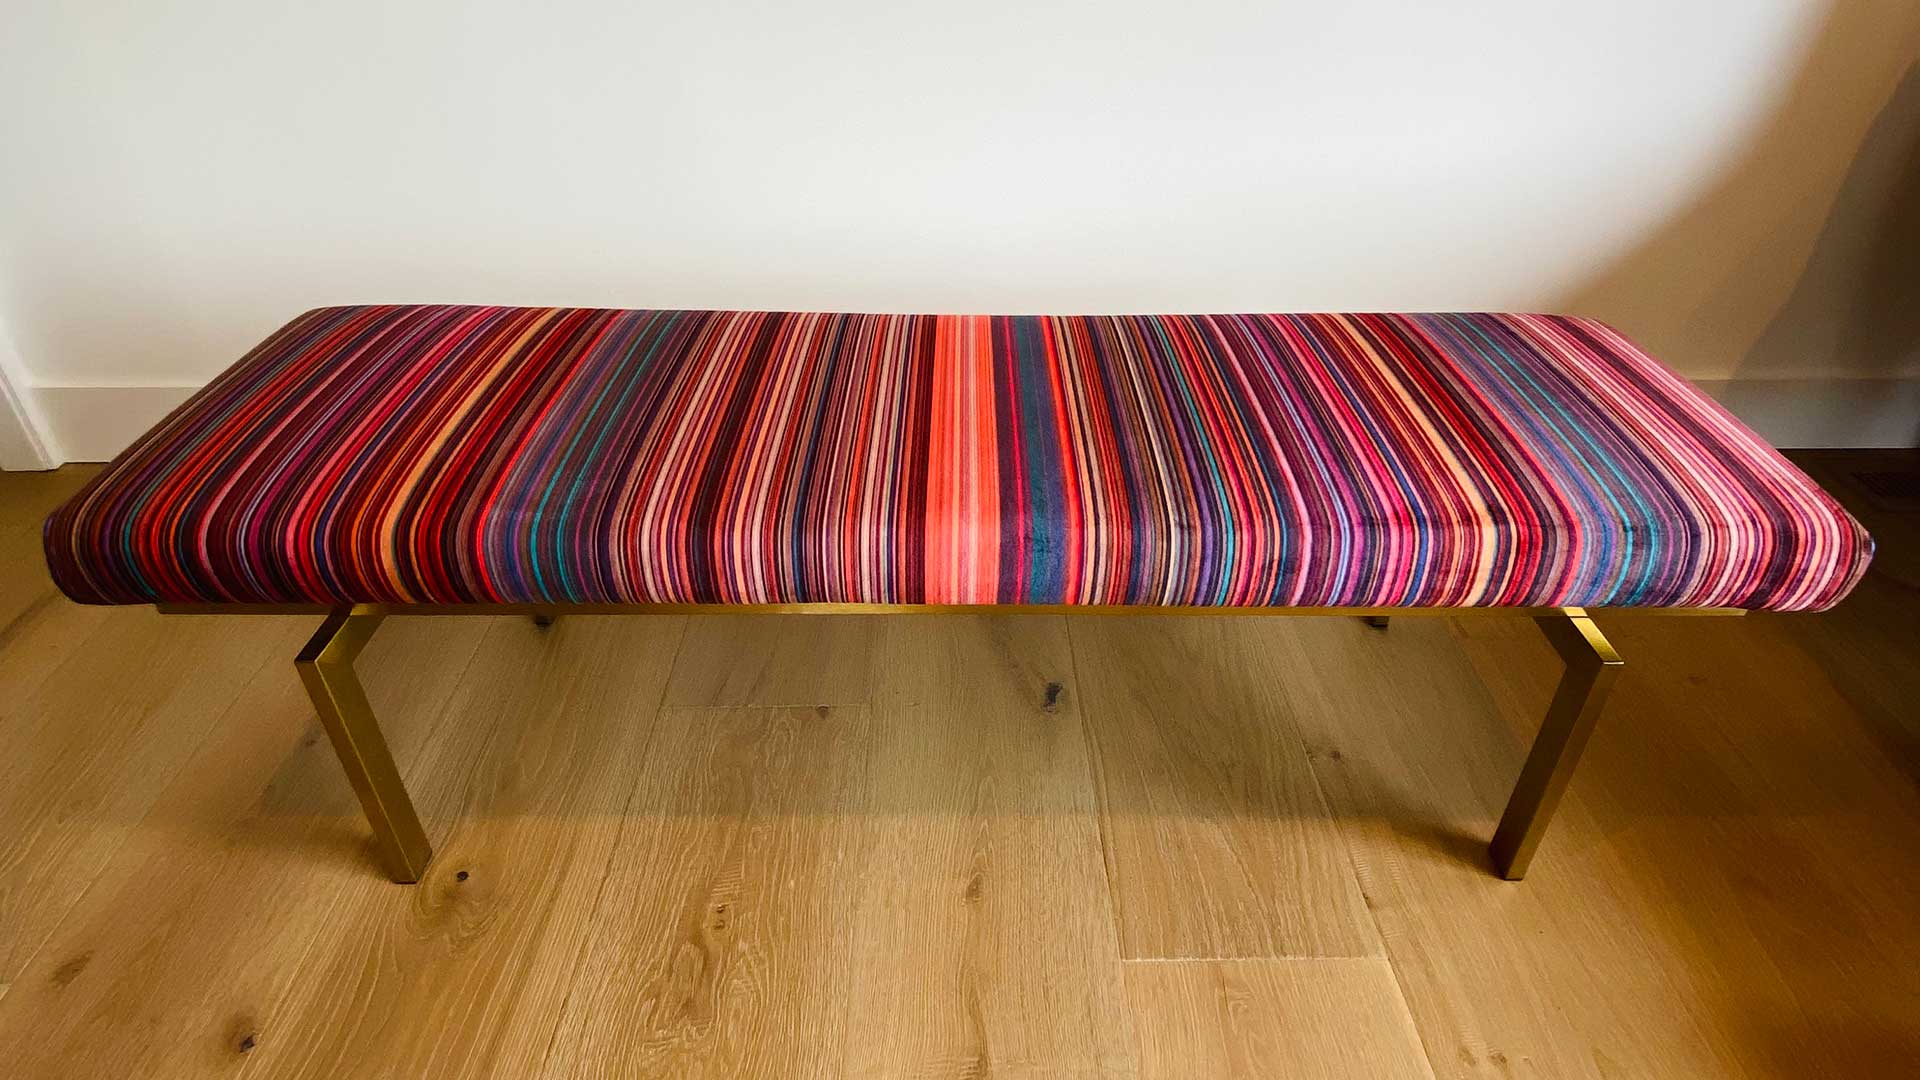 Oz Van Rosen, The Glitch Bench, 2021, Art printed on velvet fabric, 17” wide, 18 Tall, 58 inches long, $4,000